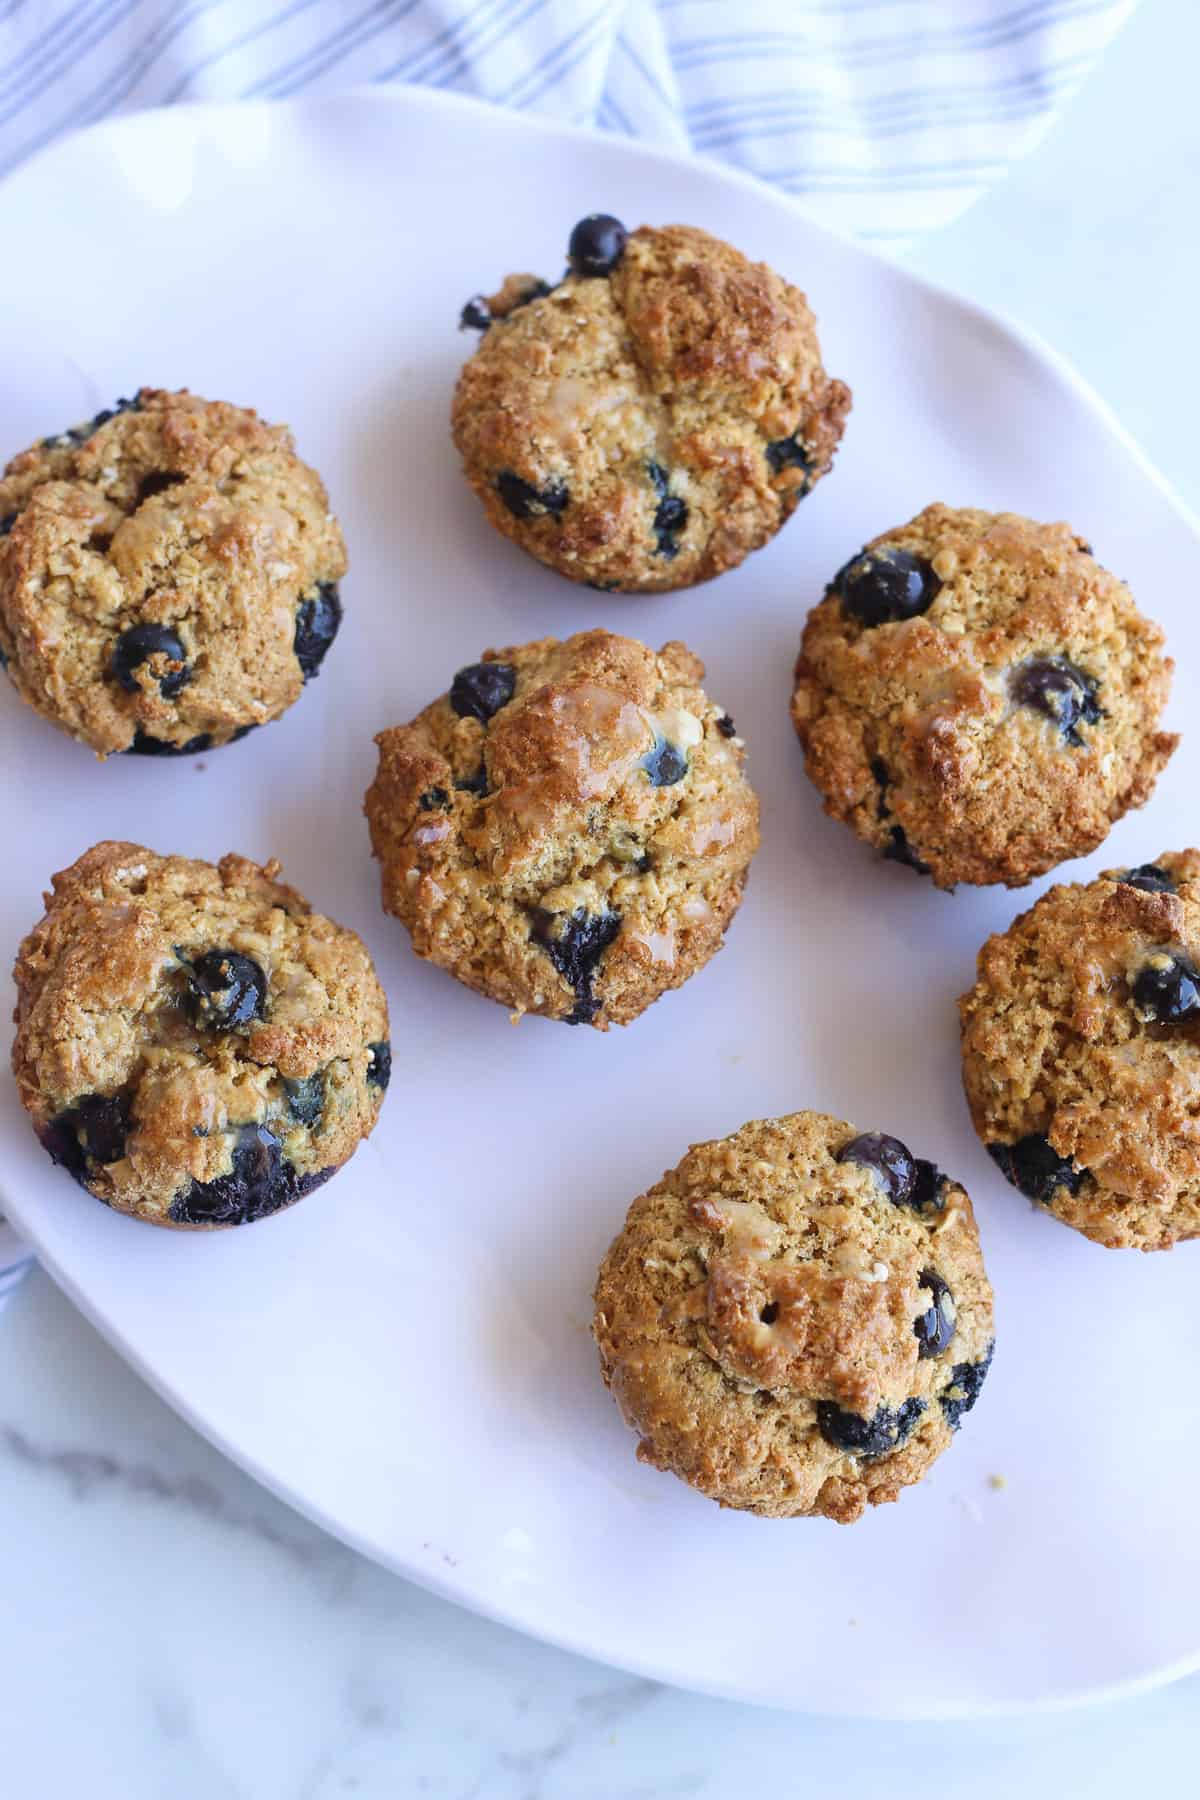 Blueberry oatmeal muffins cooling on a white platter.